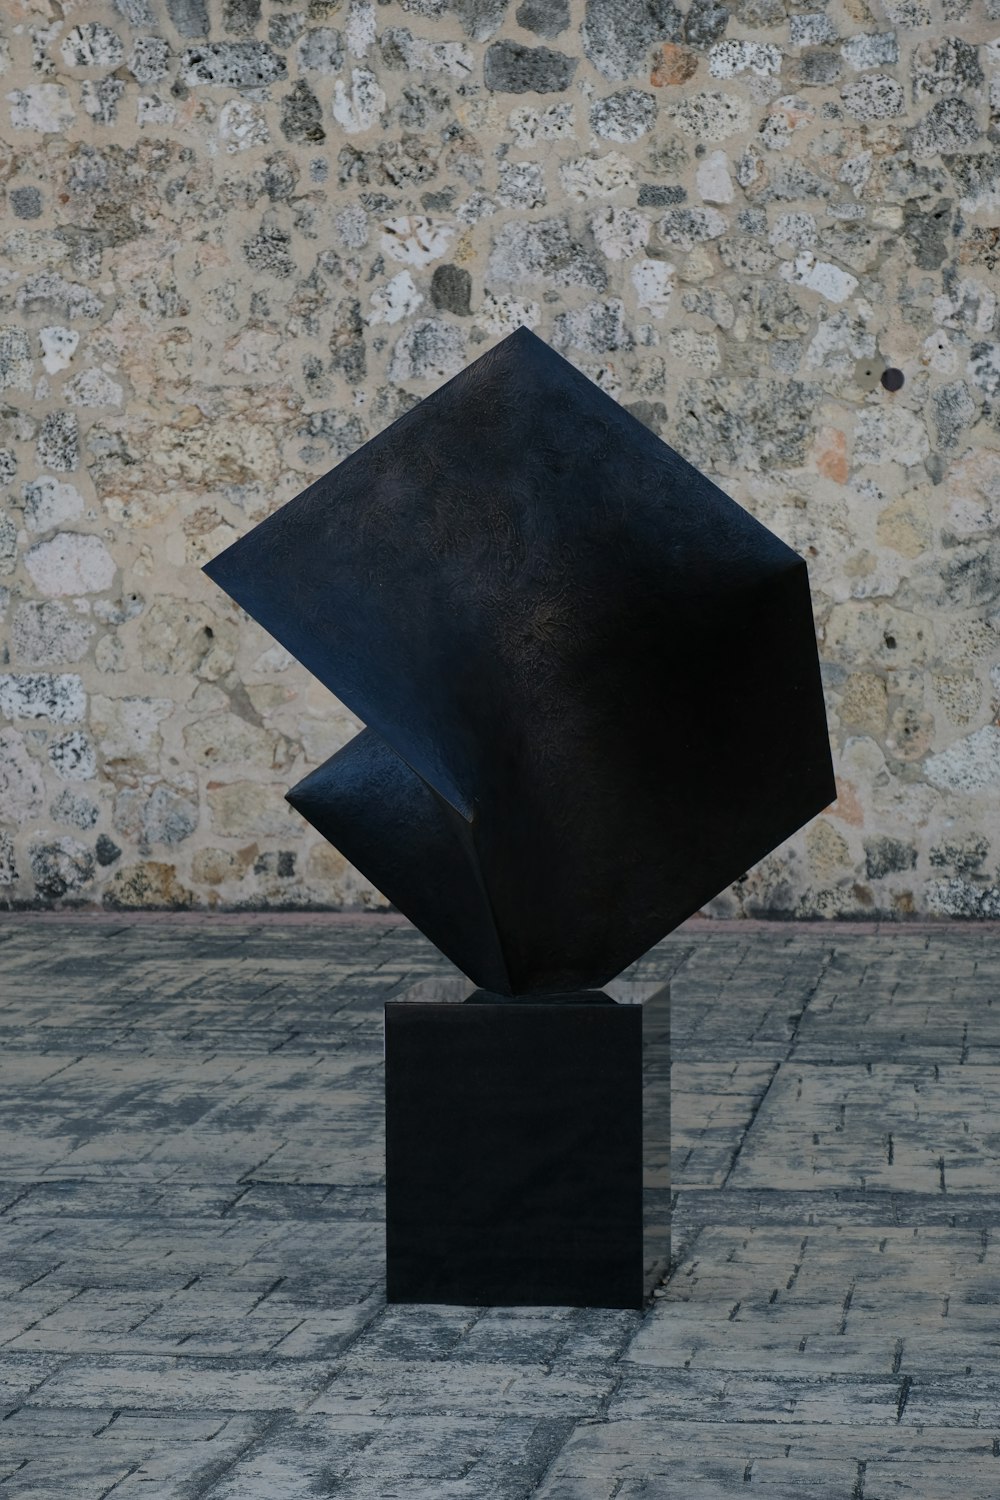 a black sculpture sitting on top of a brick floor